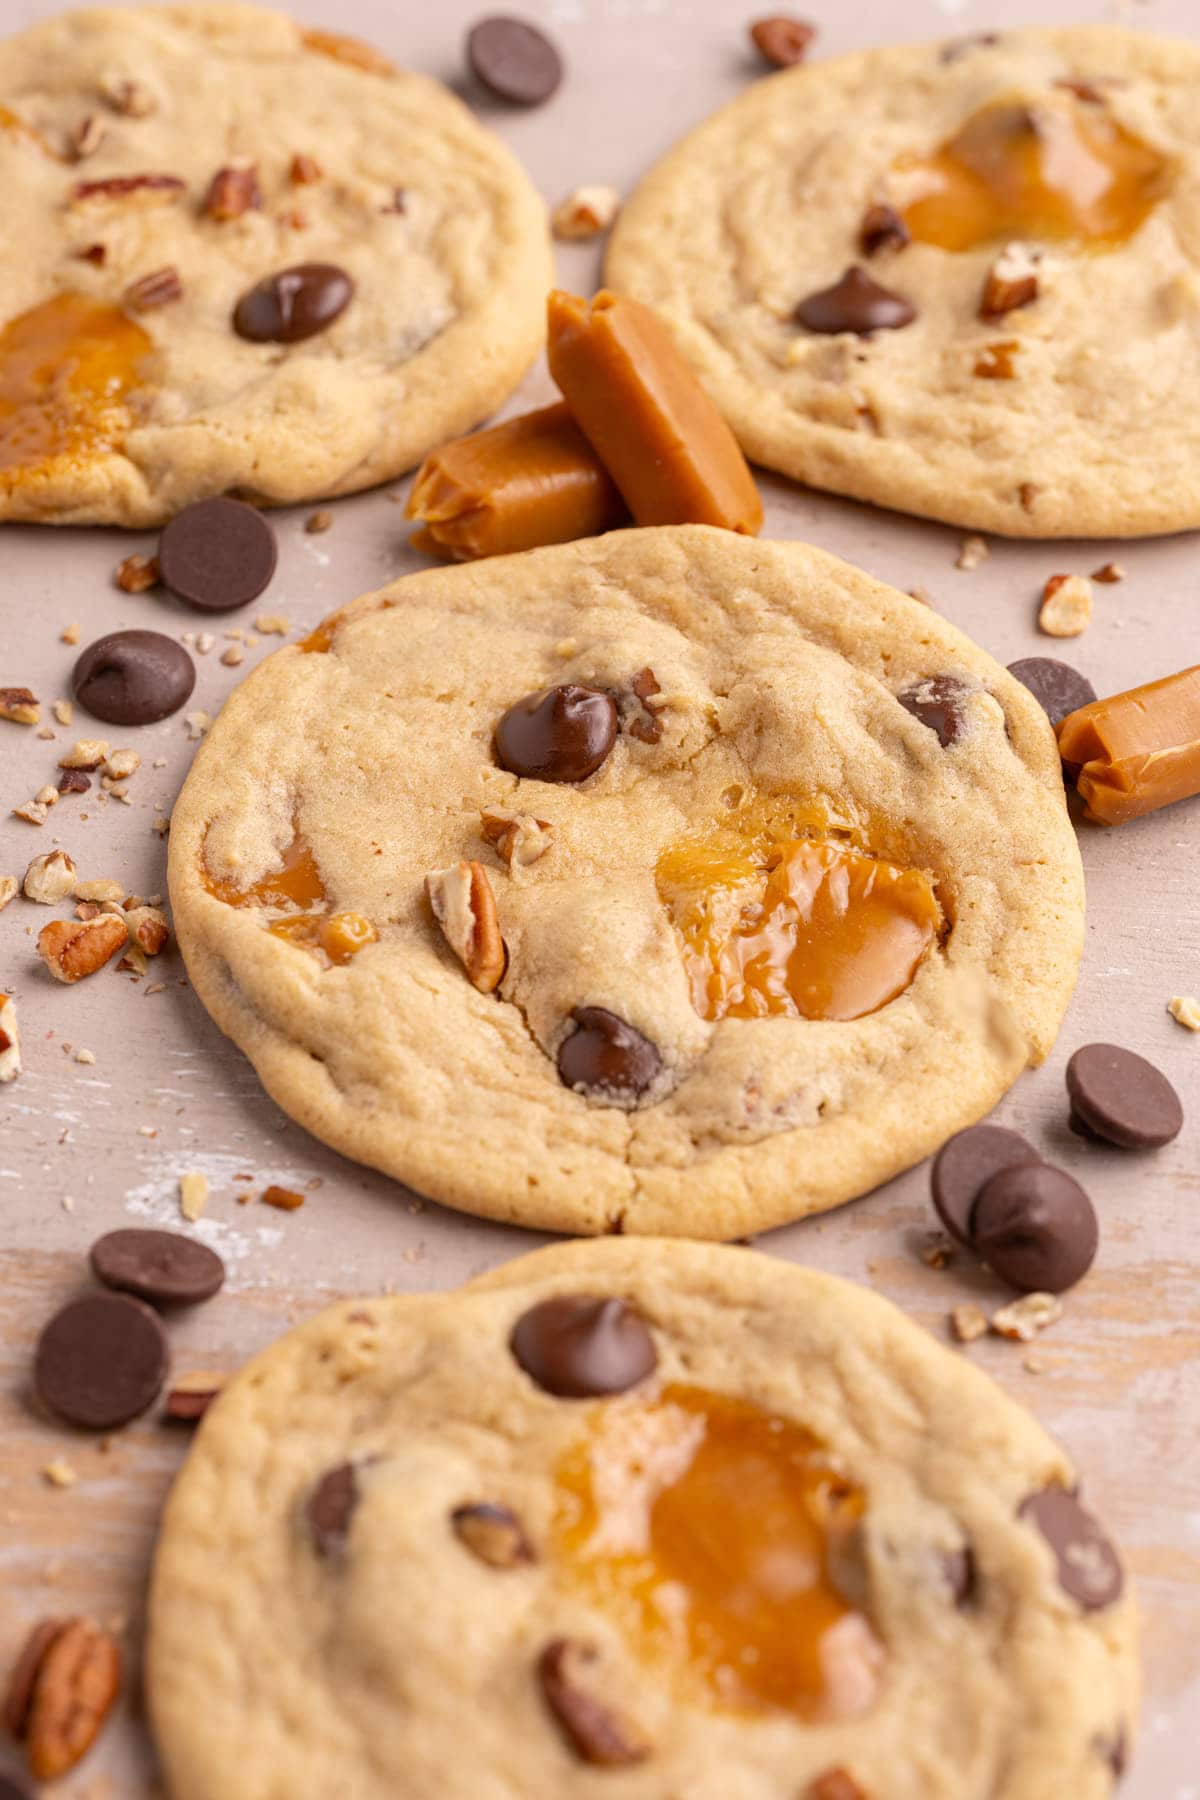 Turtle cookies with pools of caramel, crunchy pecans, and chocolate chips